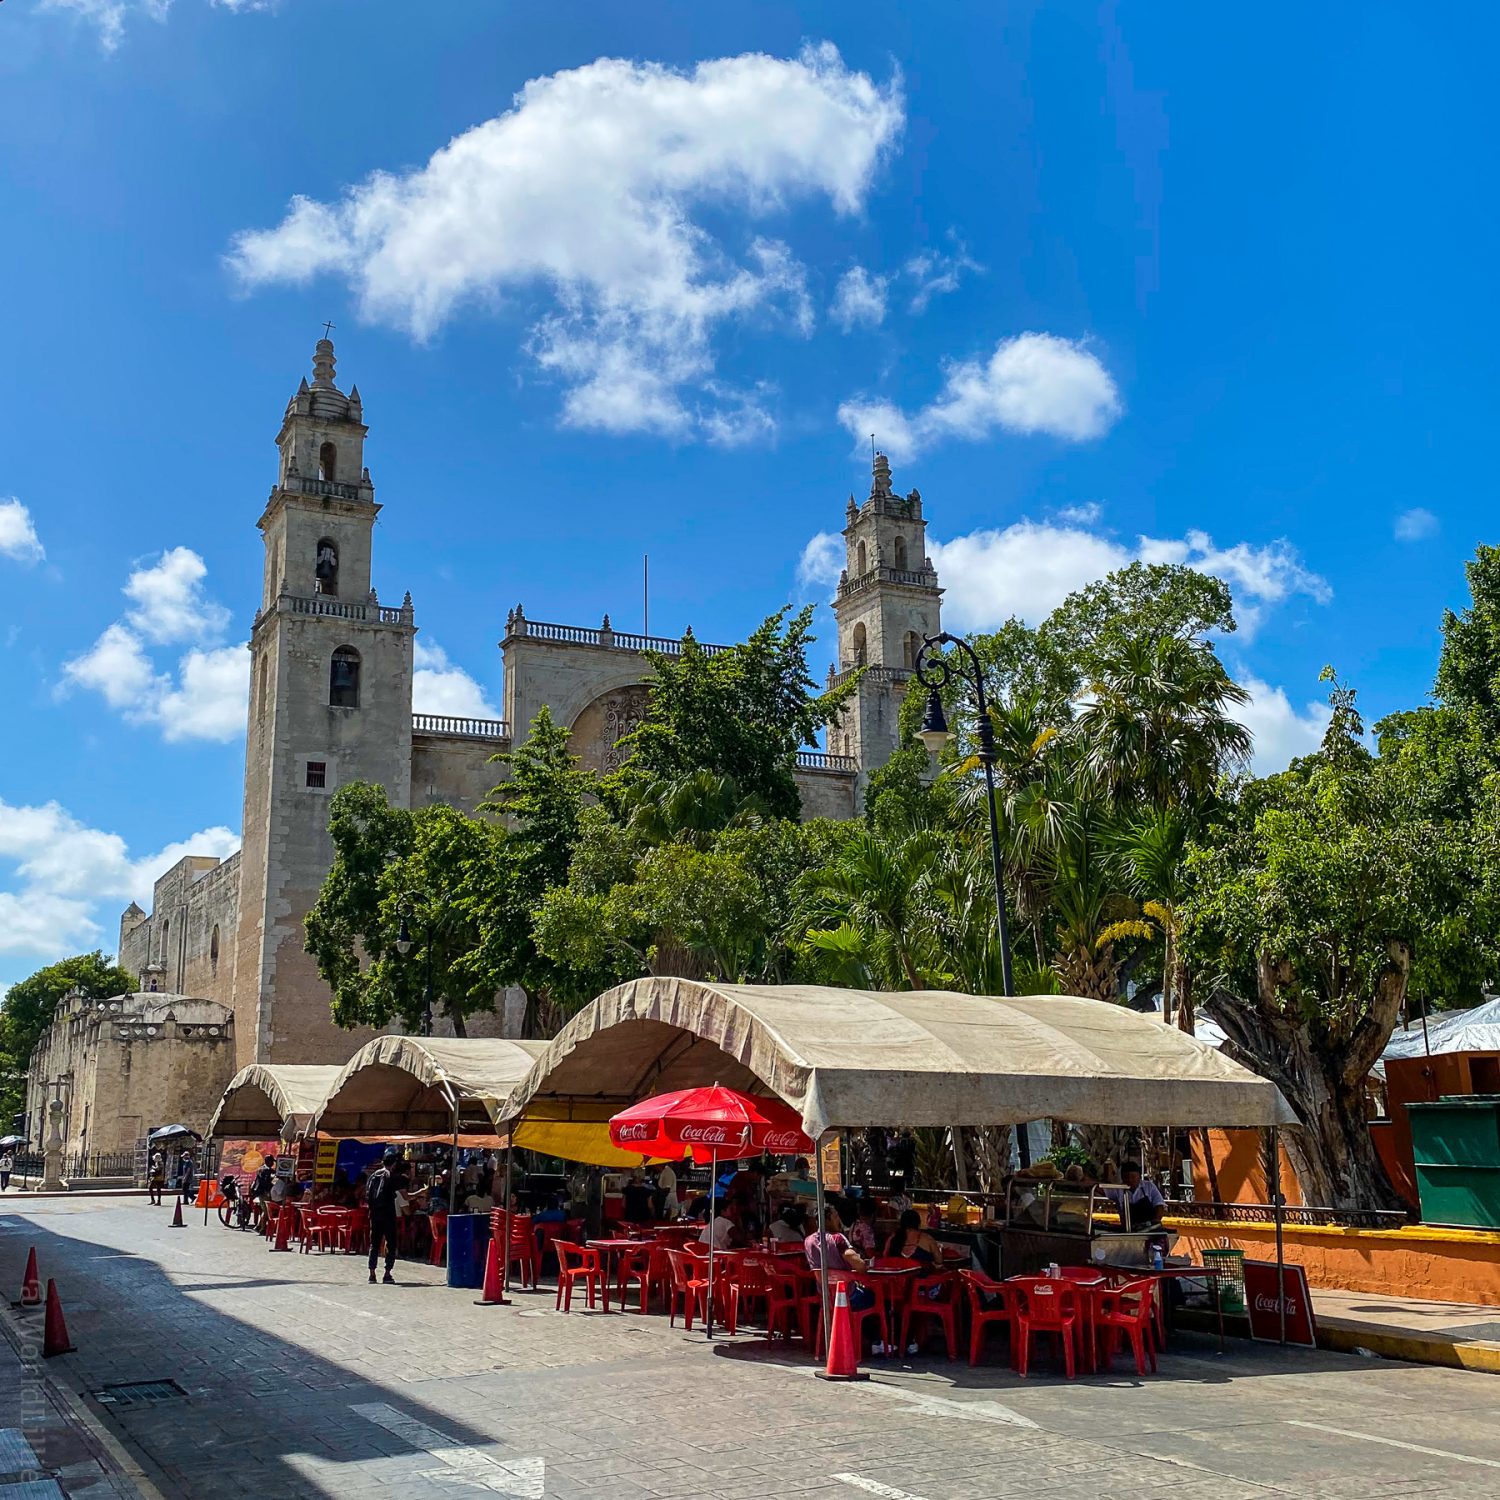 The Centro of Merida, where many food stalls and restaurants are.